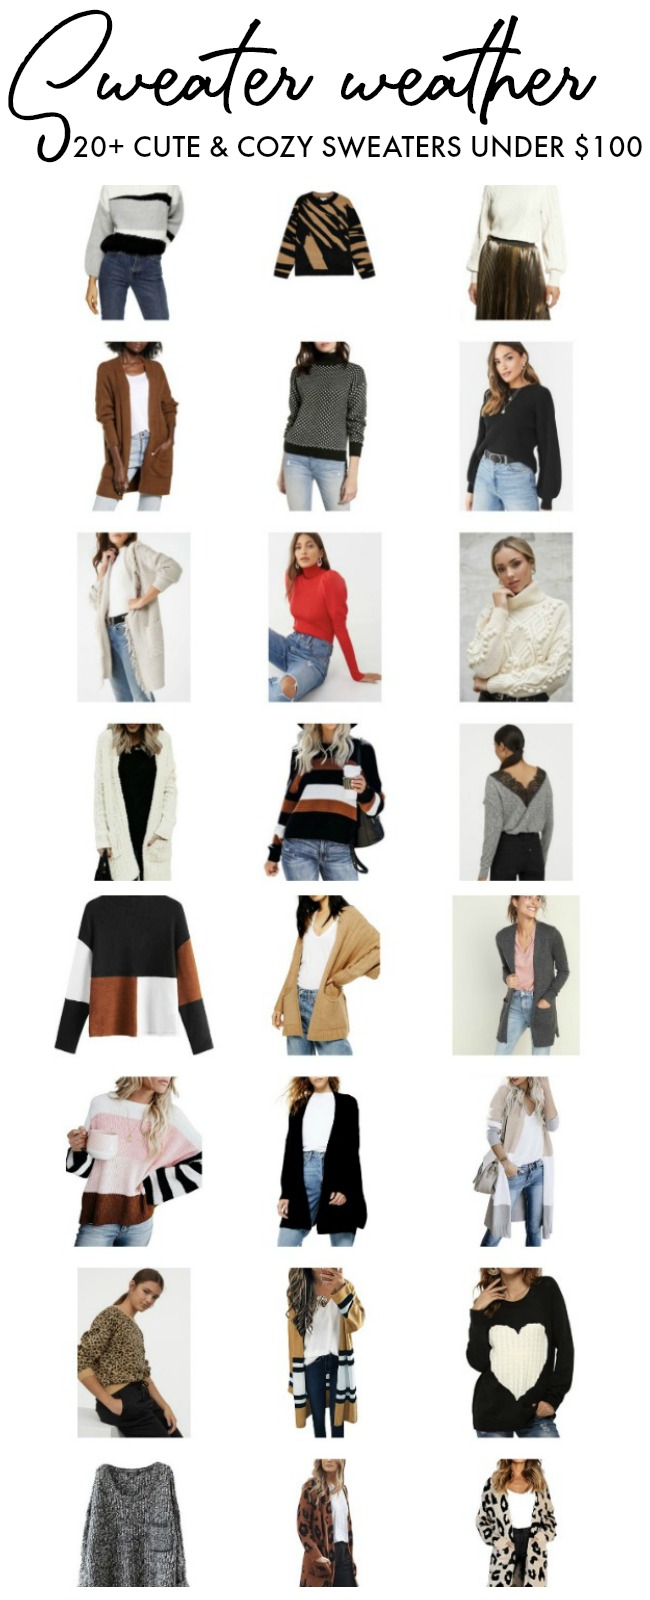 Sweater Weather - 30+ of the Coziest Sweaters this Season - Cute and Cozy Sweaters under $100 - This is our Bliss